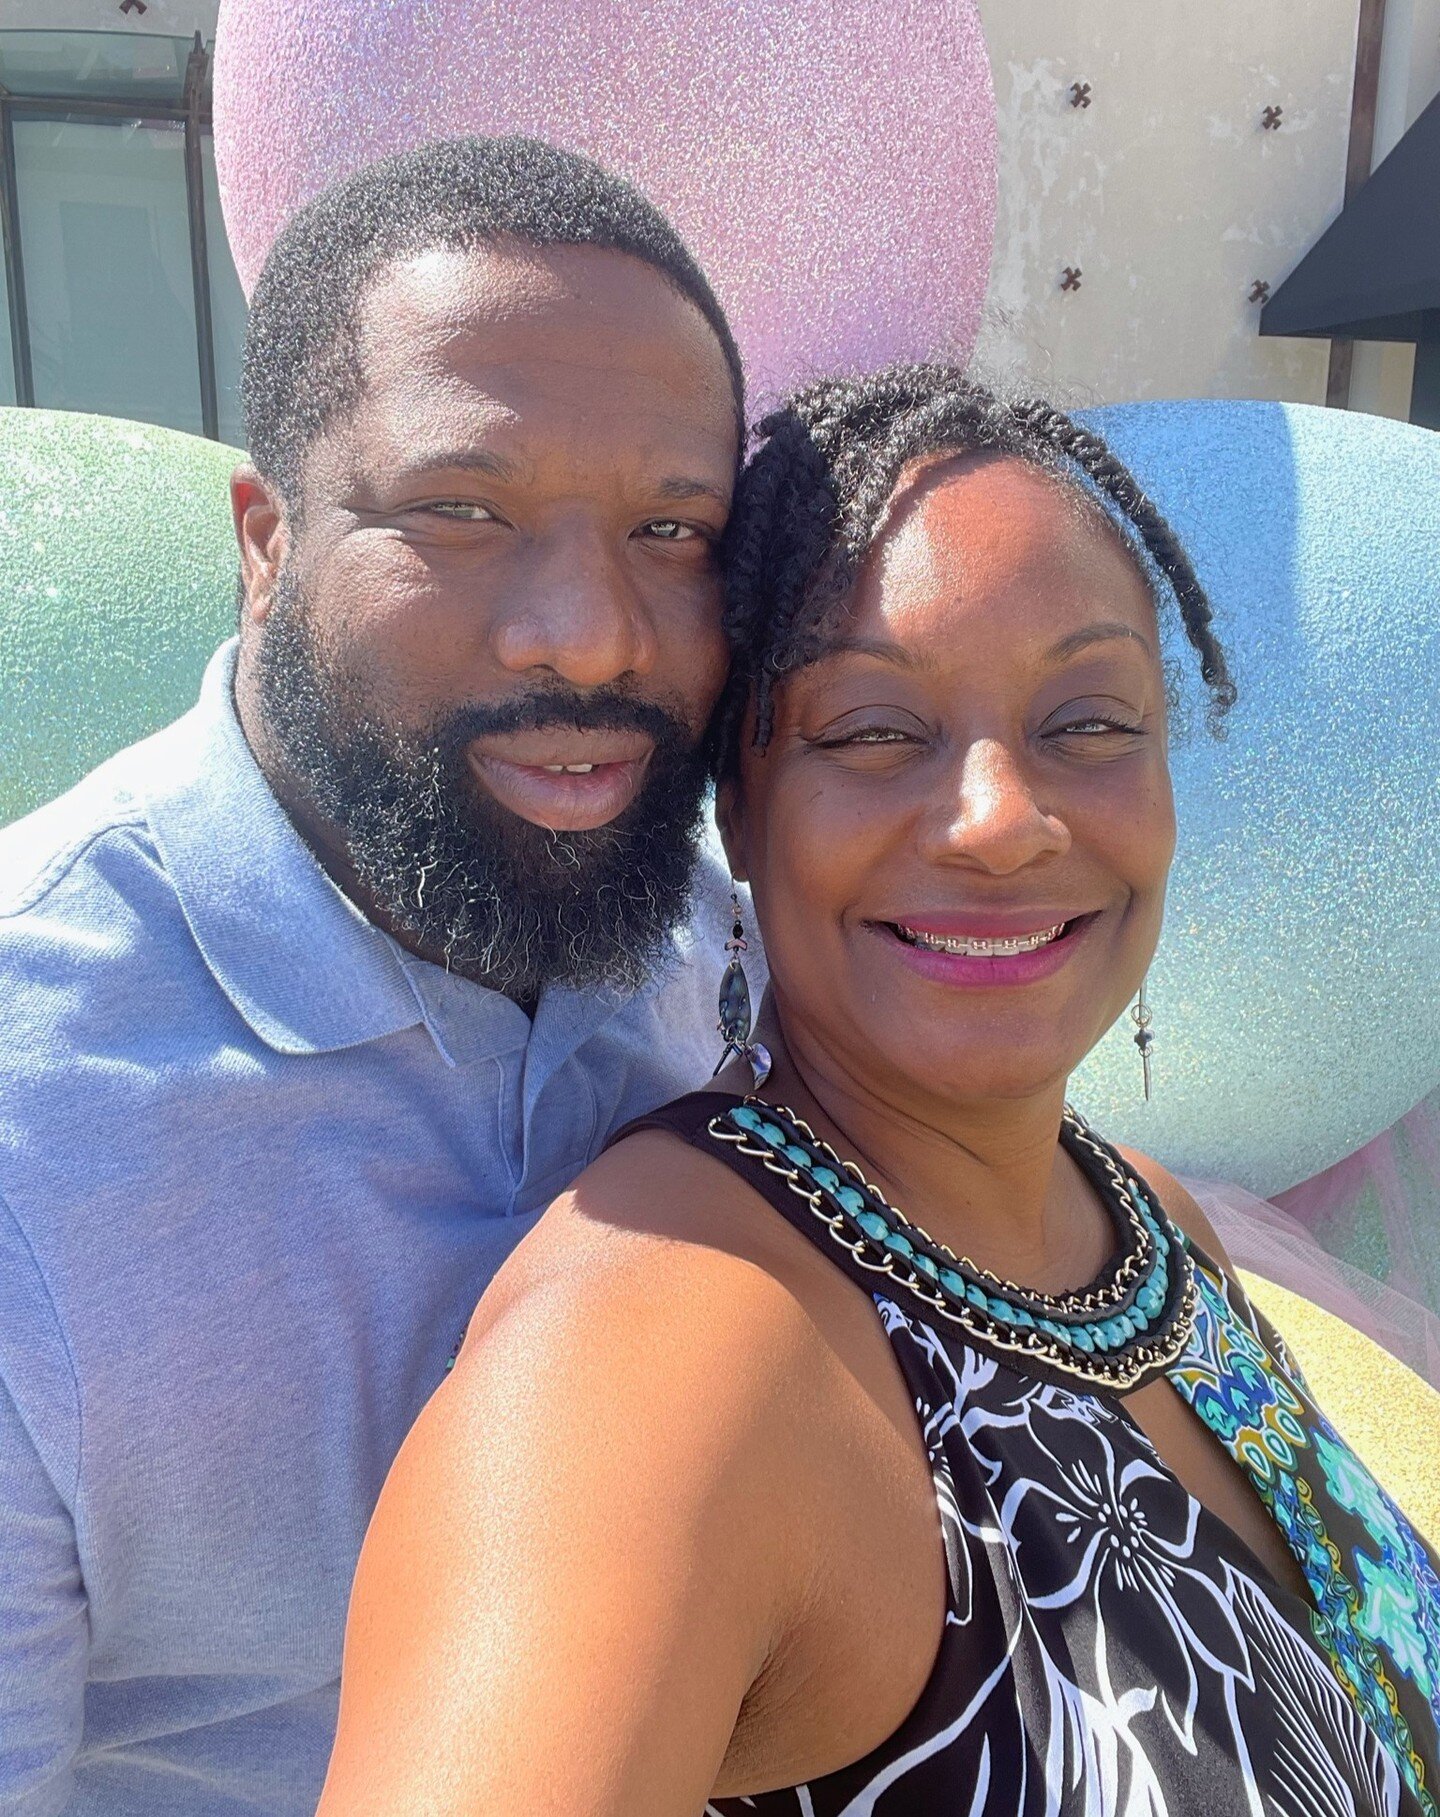 &ldquo;The Best Easter is one spent with your Peeps&rdquo;

Happy Easter Sunday from the Ashade&rsquo;s

.
.
.
.
.
&ldquo;Maximizing Tax-Deductible Living&rdquo;